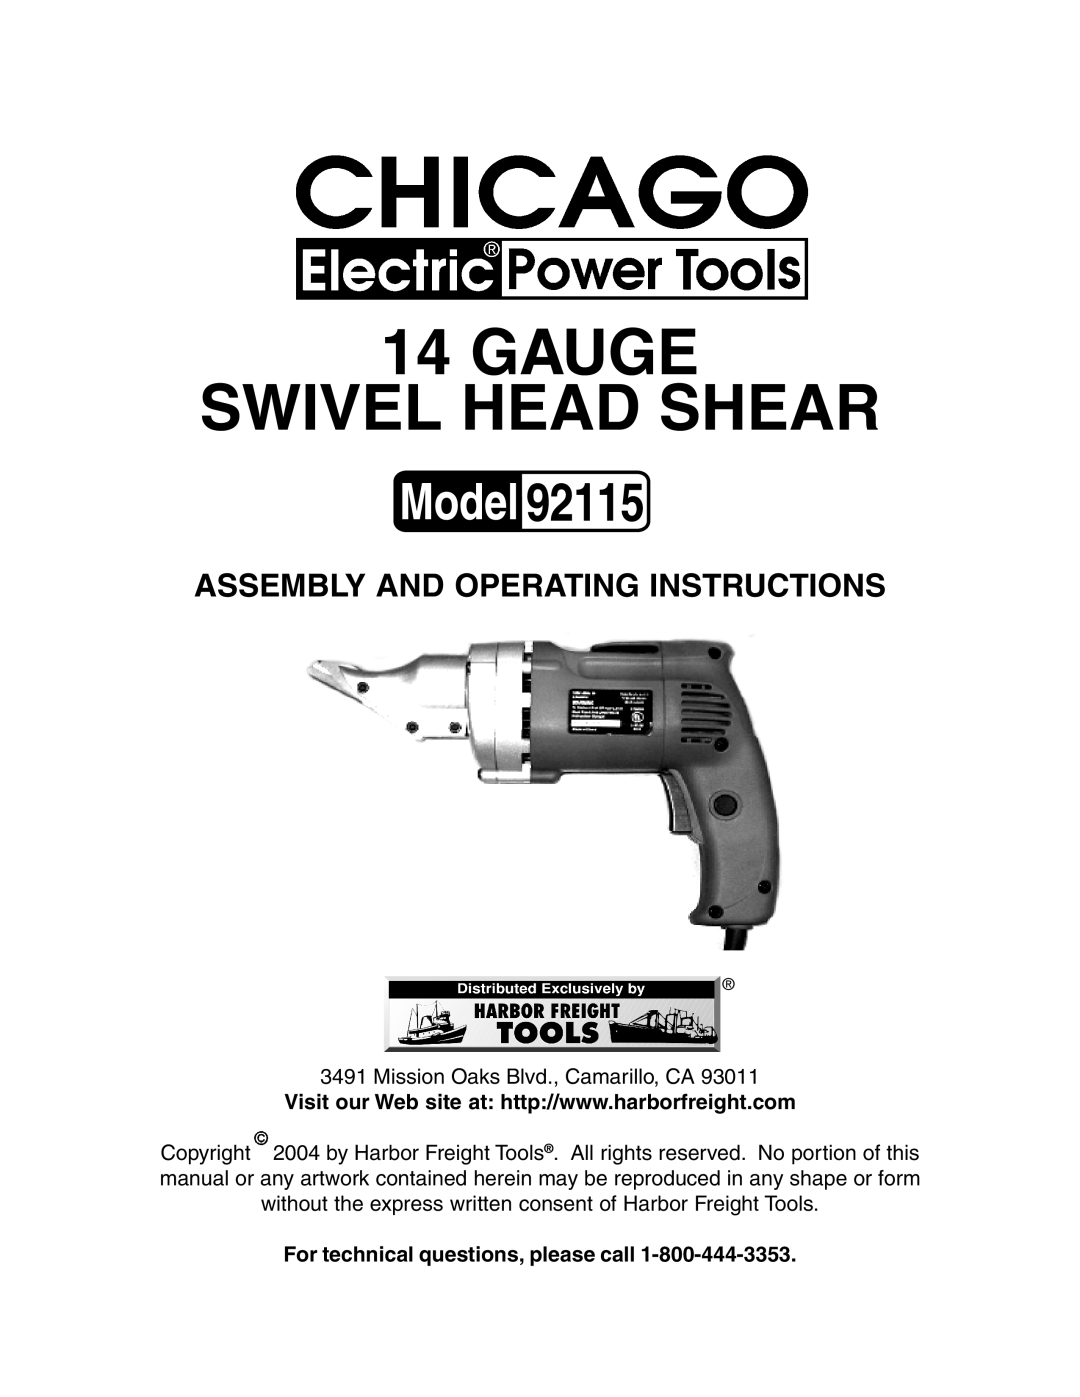 Harbor Freight Tools 92115 manual For technical questions, please call, Gauge Swivel Head Shear 